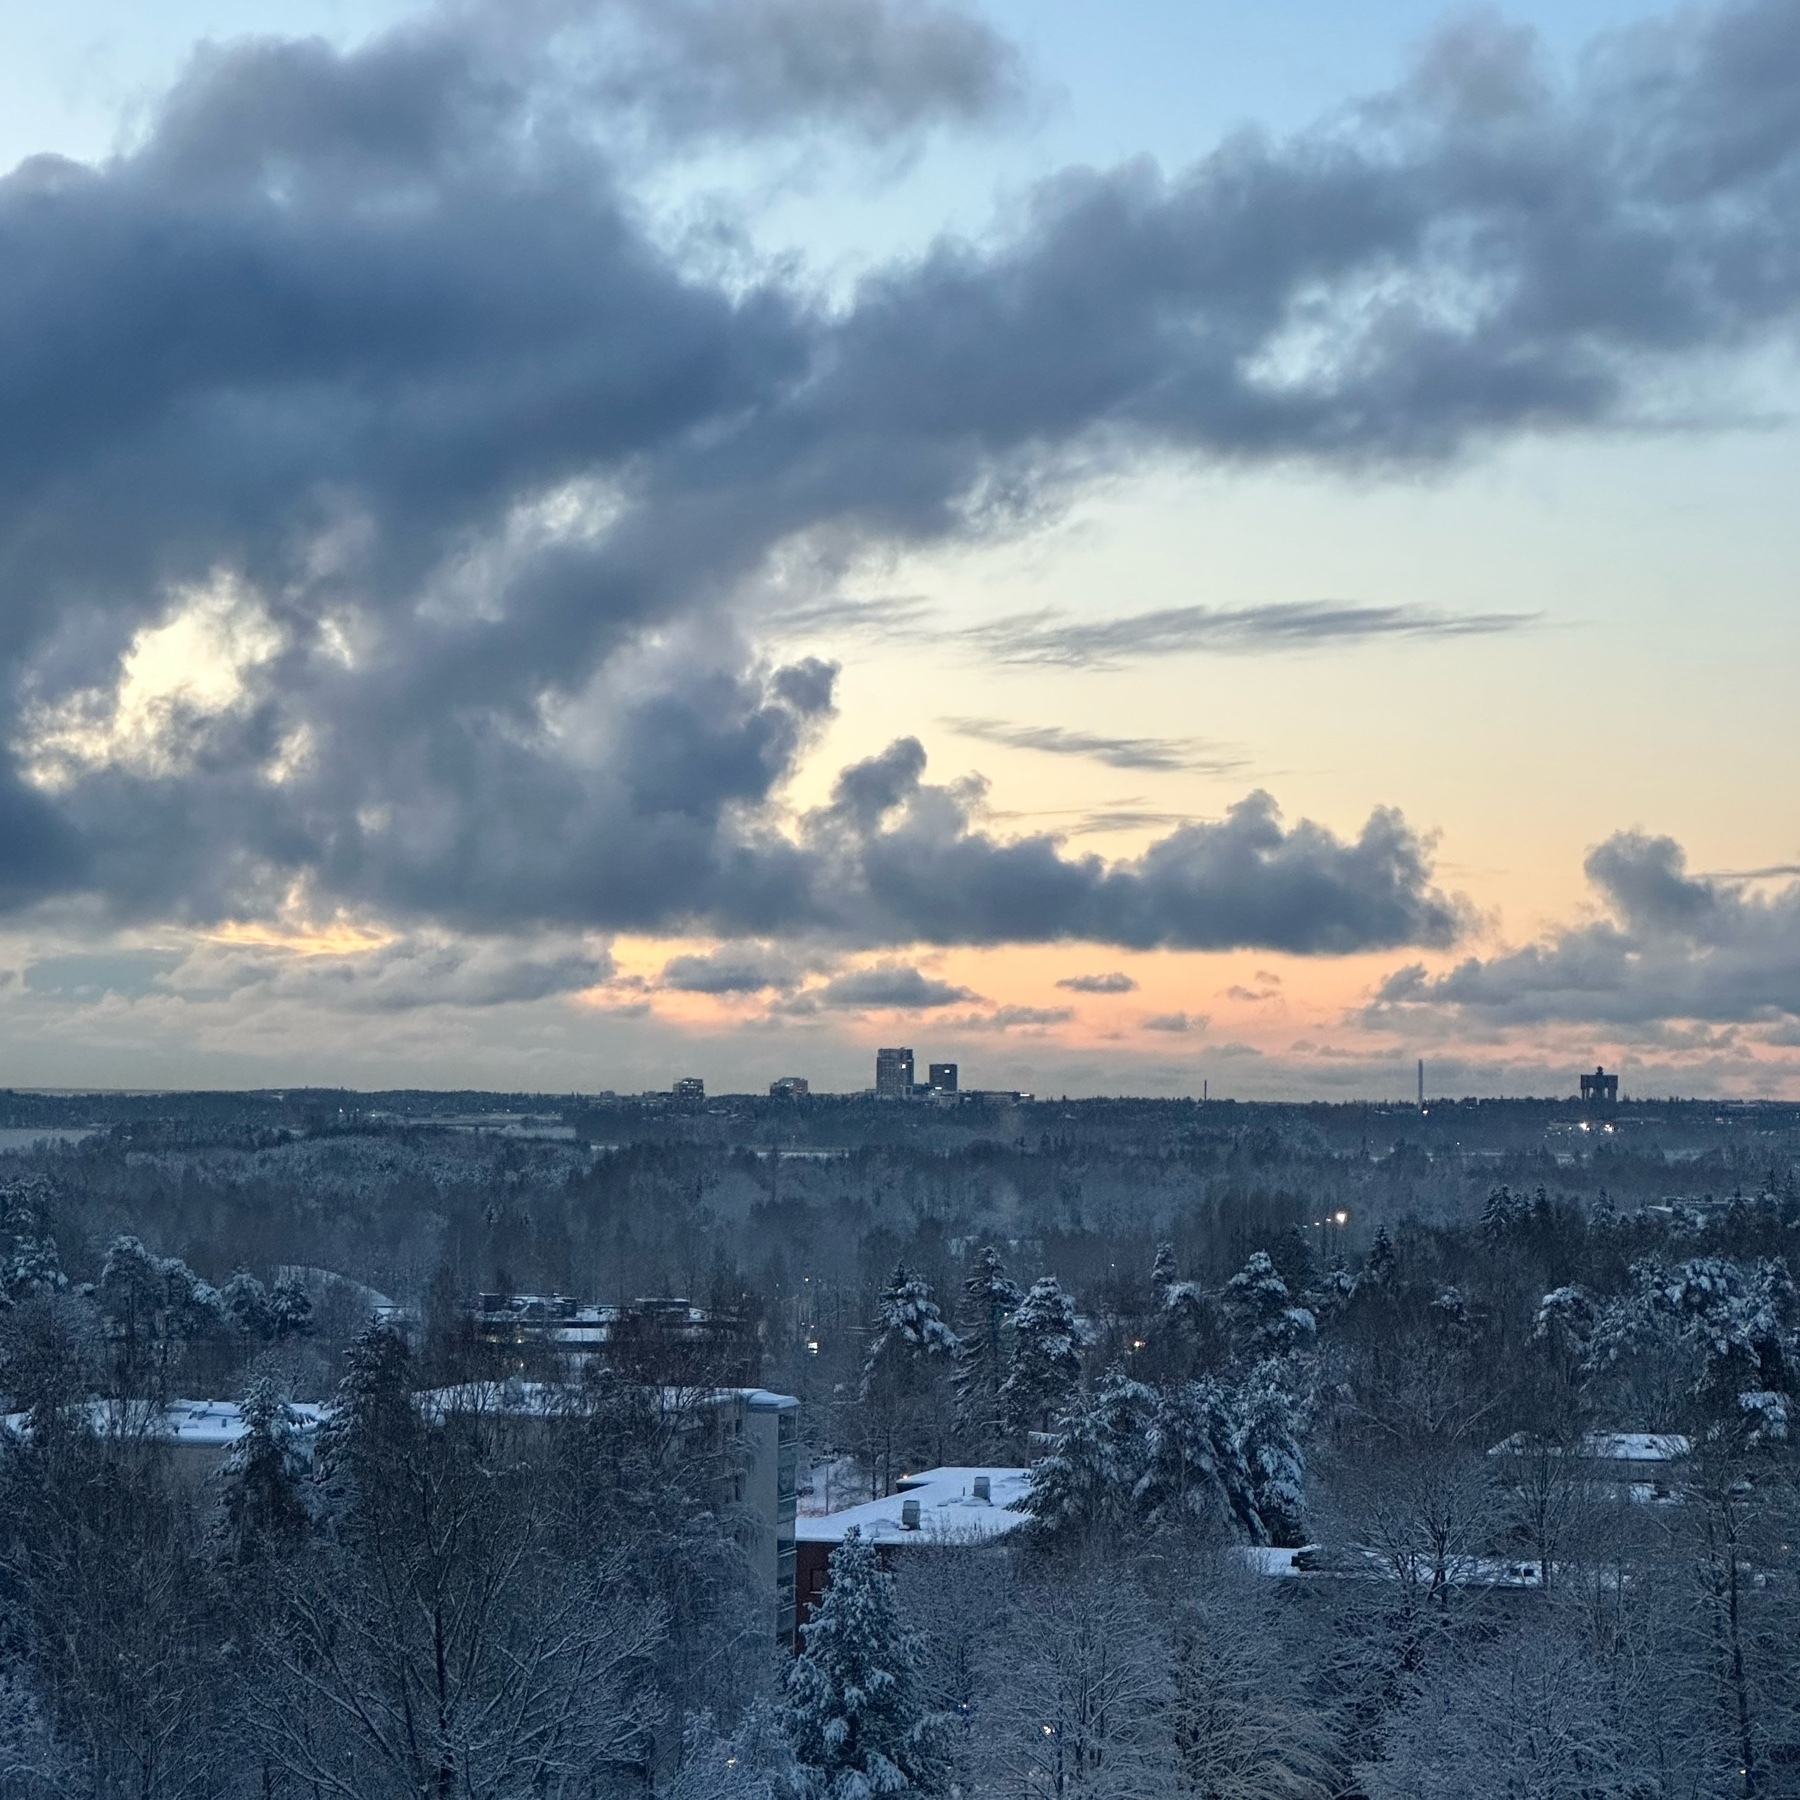 view over snowy Helsinki. Clouds, snowy trees and rooftops